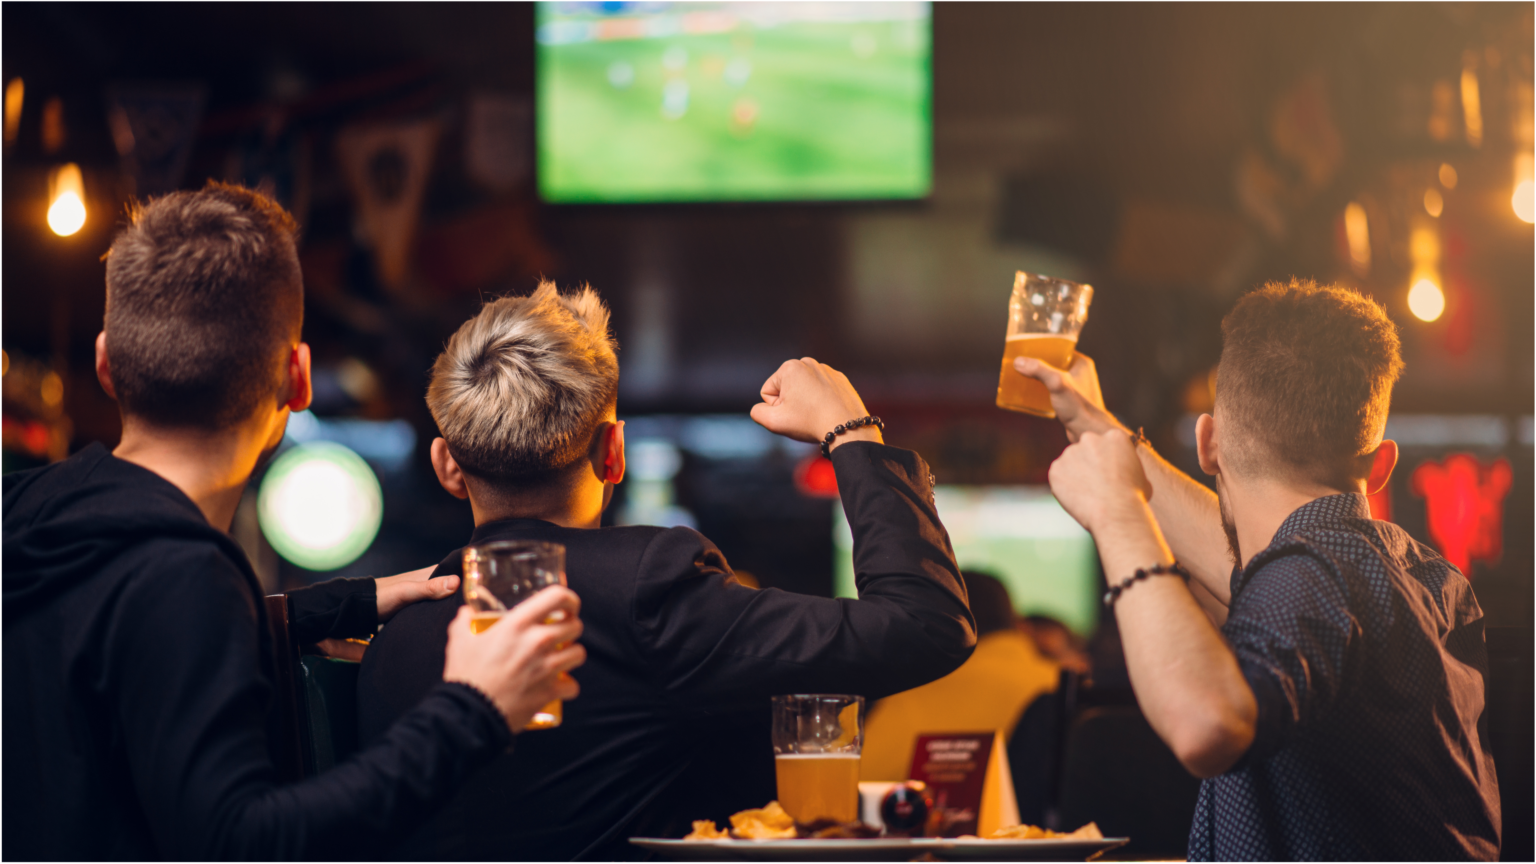 Football fans cheer as they watch a game at a pub and raise their glasses.